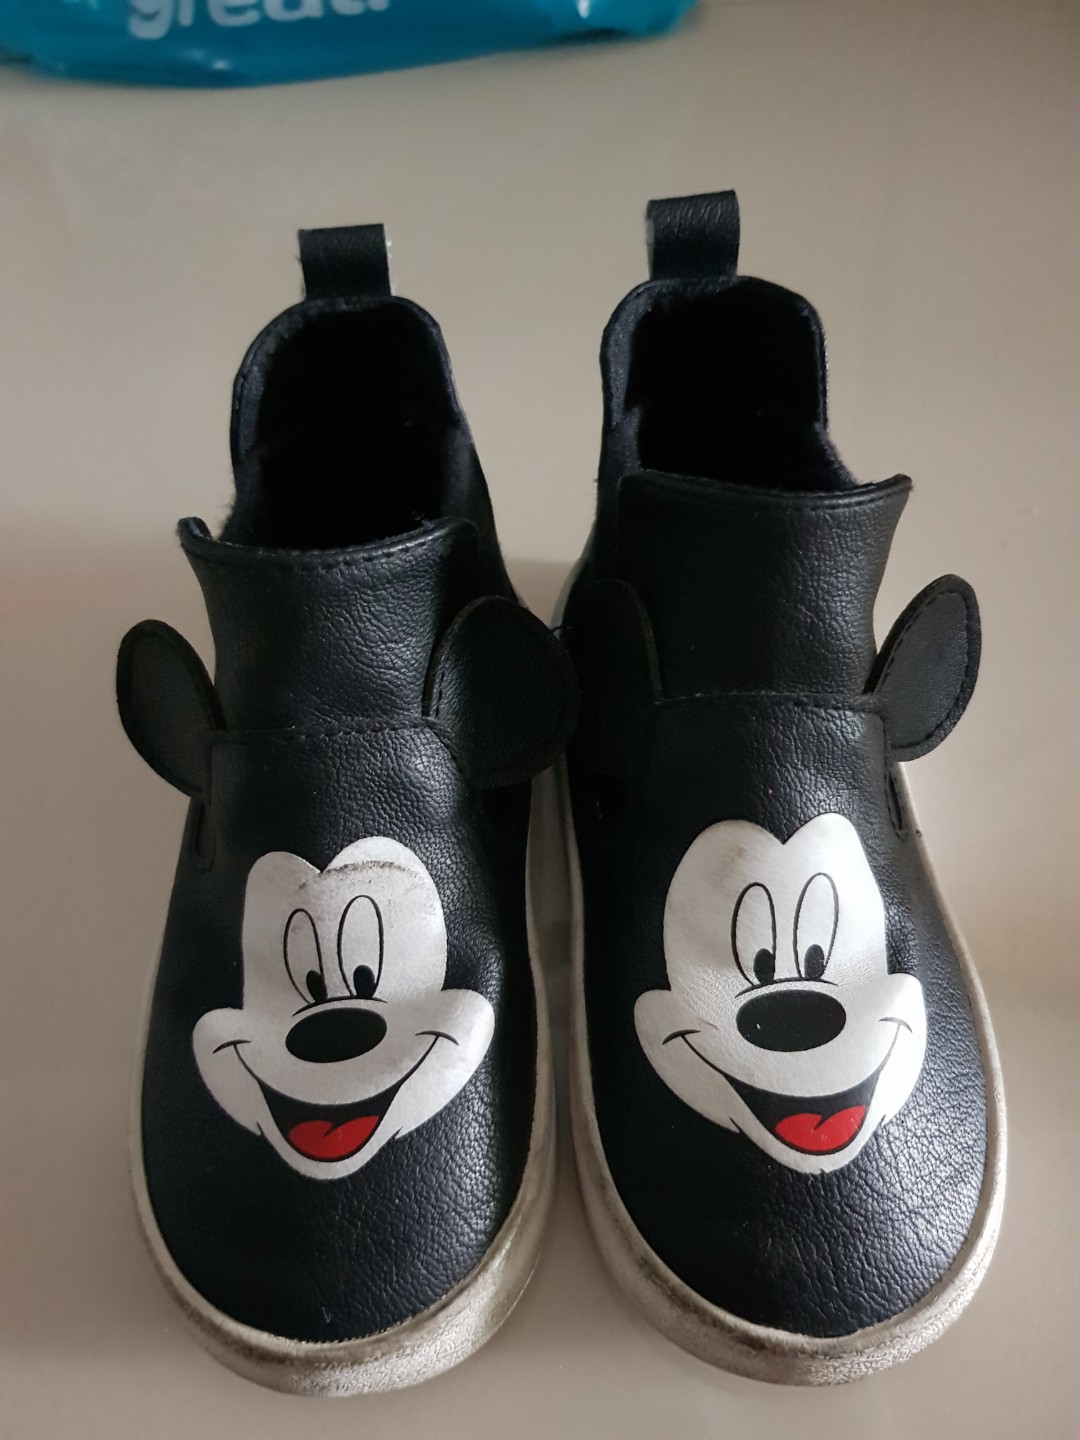 h&m mickey mouse shoes